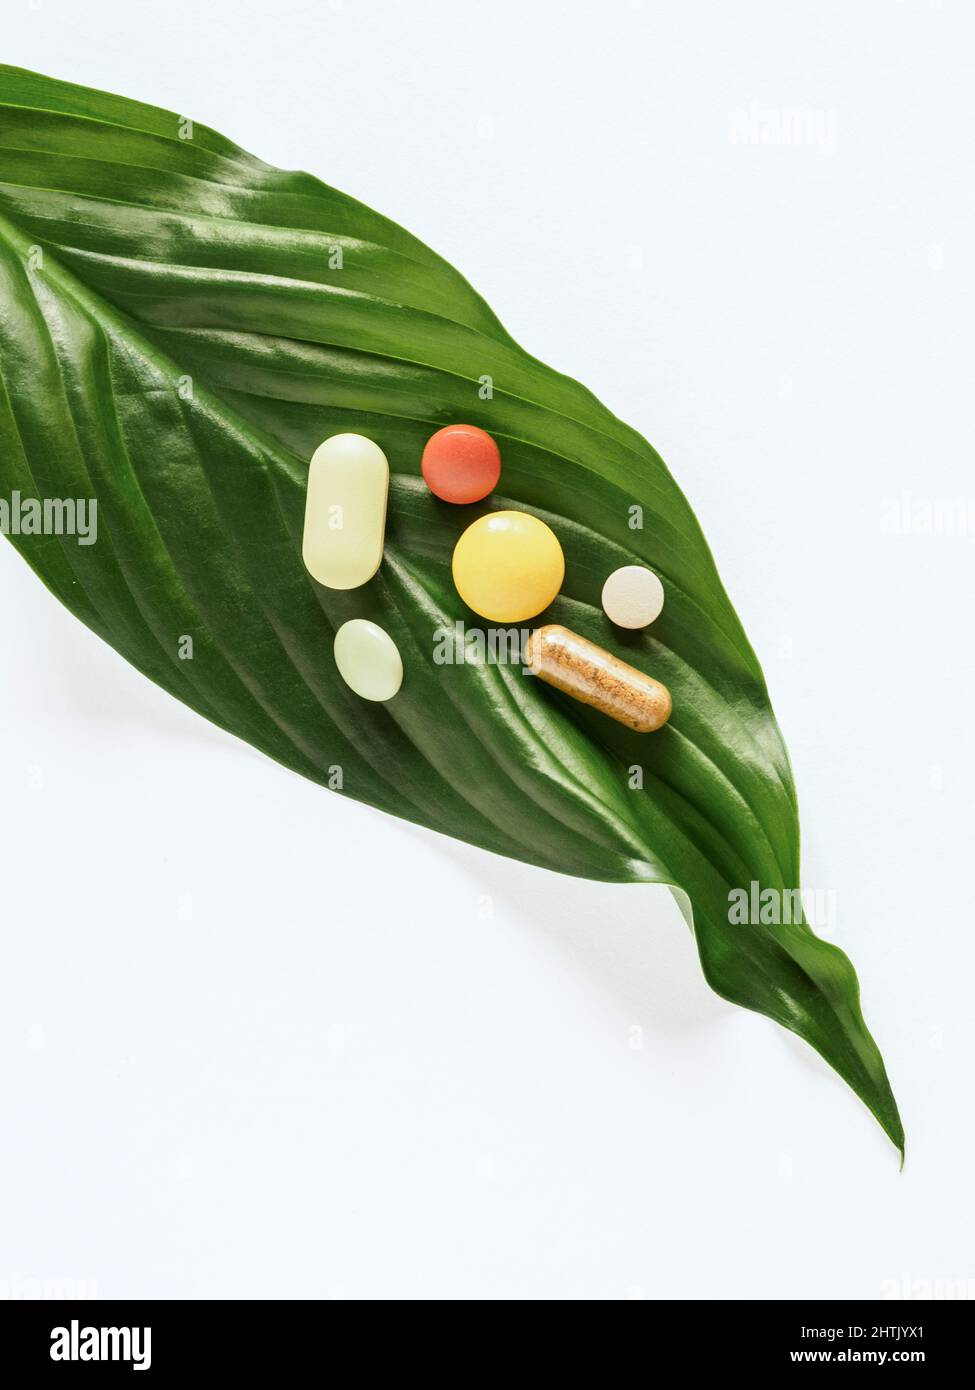 Fresh green leaf of various colorful pills and capsules isolated on white background. Vertical view. Stock Photo